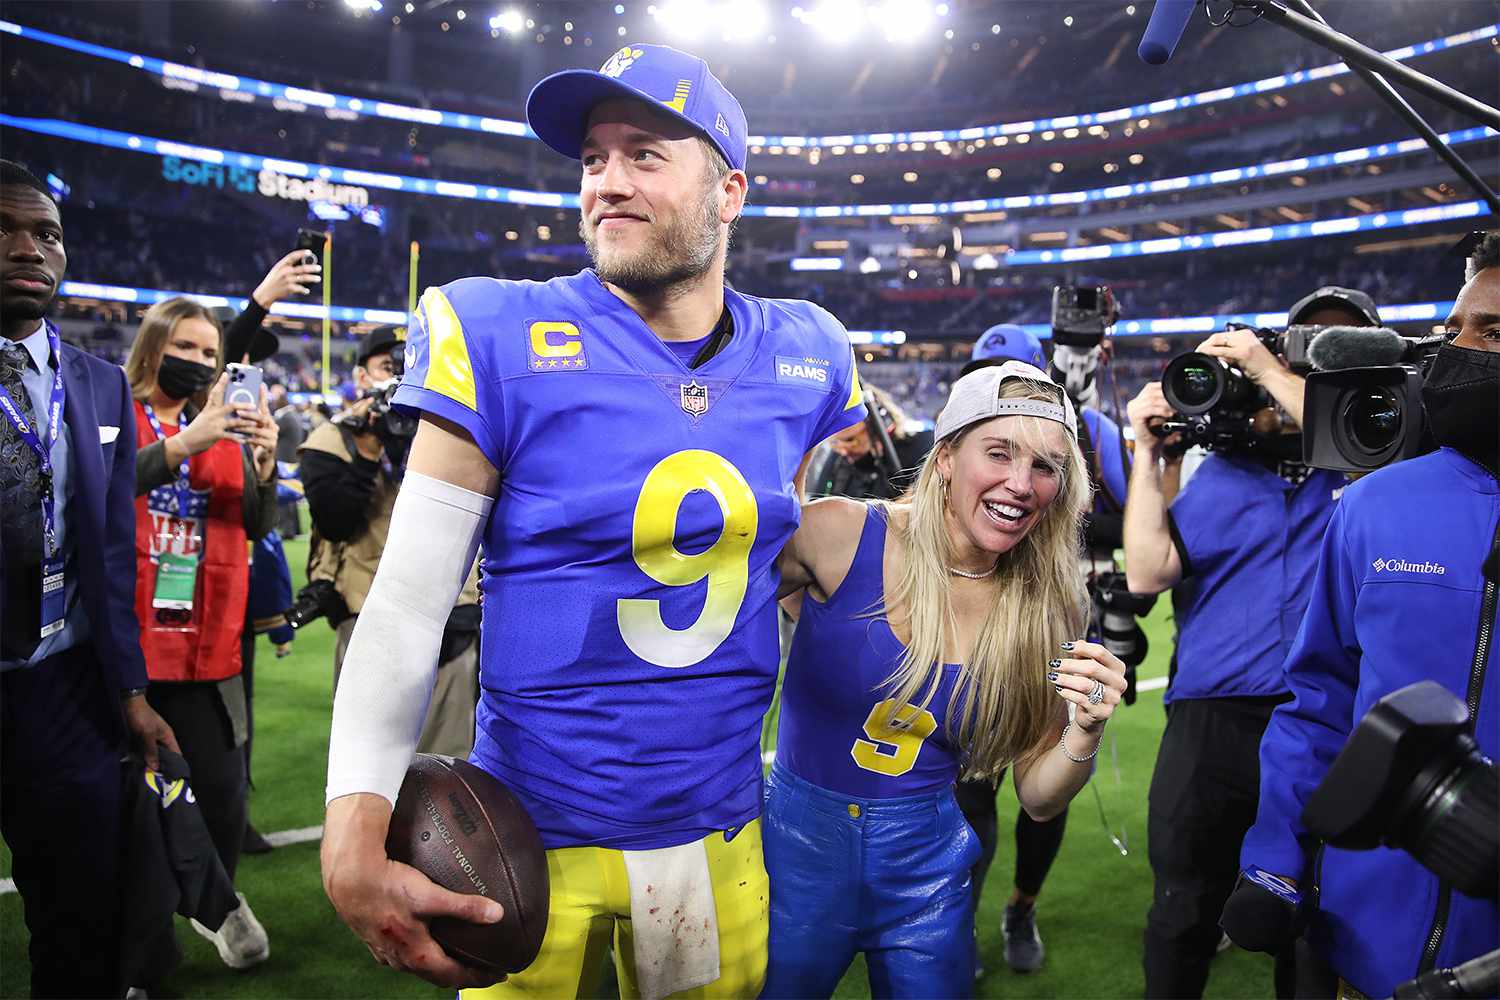 NFL News: “We’re fortunate to have him as our quarterback” – Los Angeles Rams’ Coach Exudes Confidence in Matthew Stafford